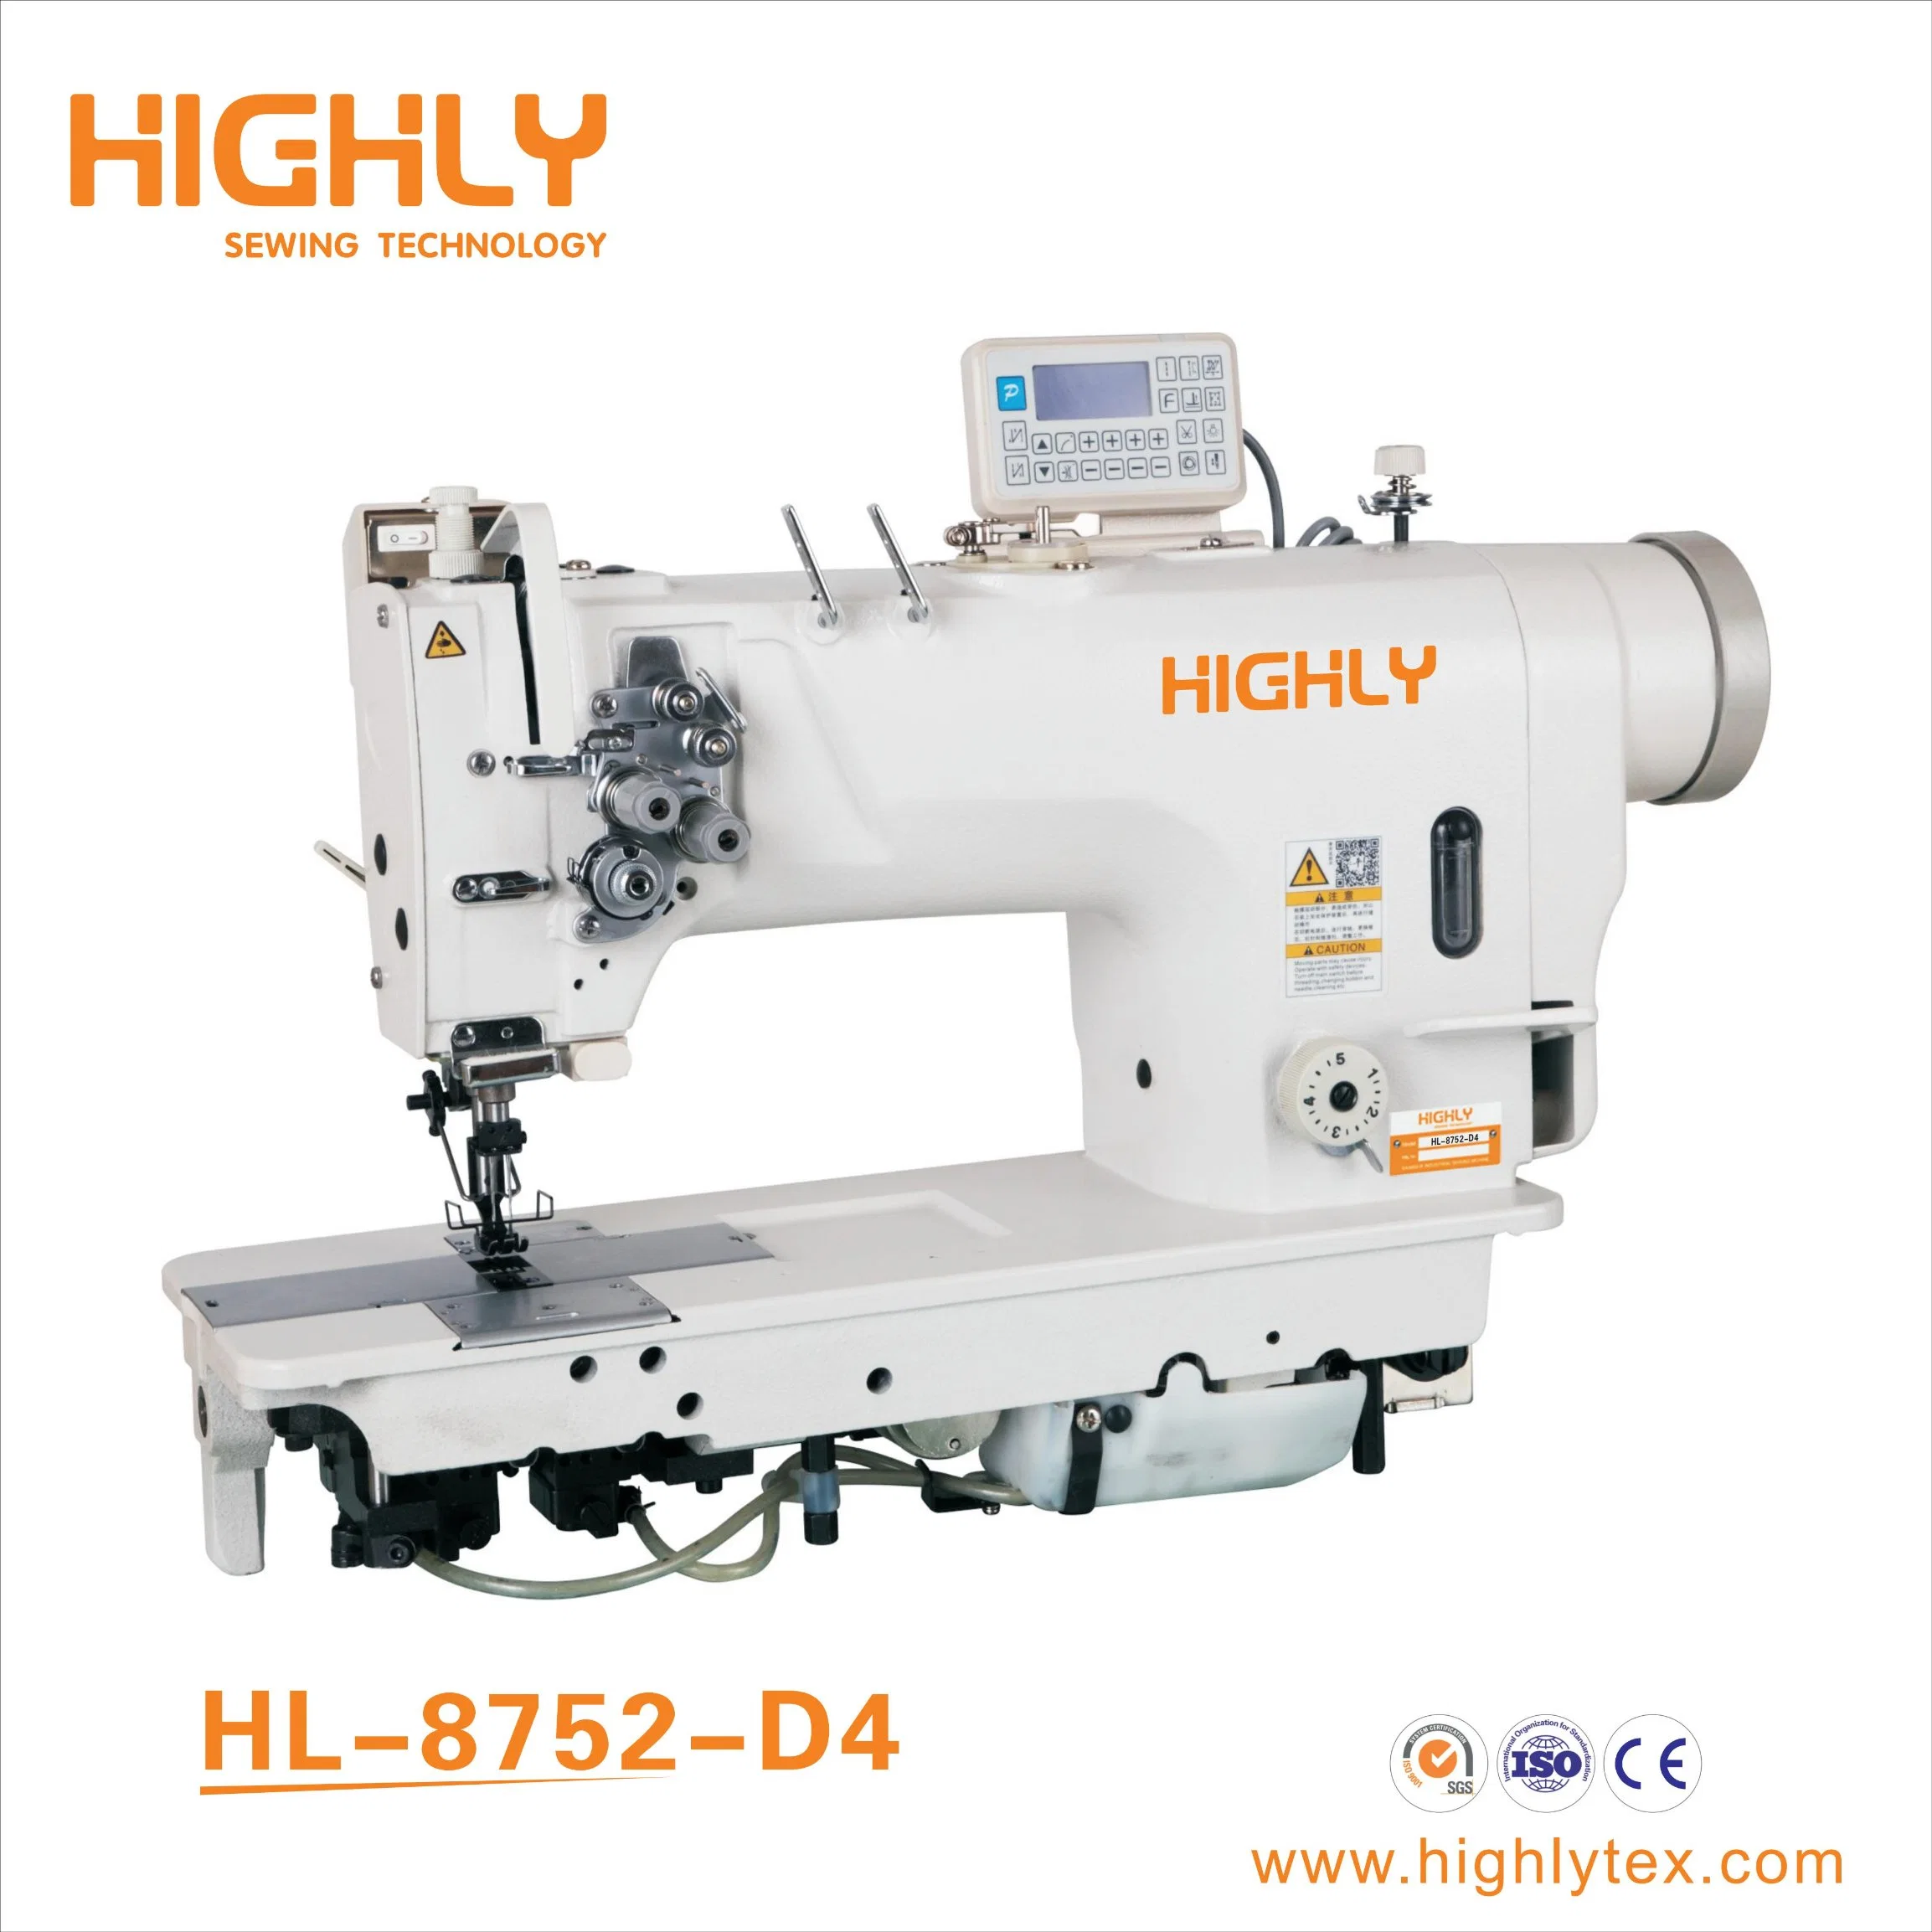 Highly Automatic Computer Direct Drive High Speed Double Needle Industrial Sewing Machine